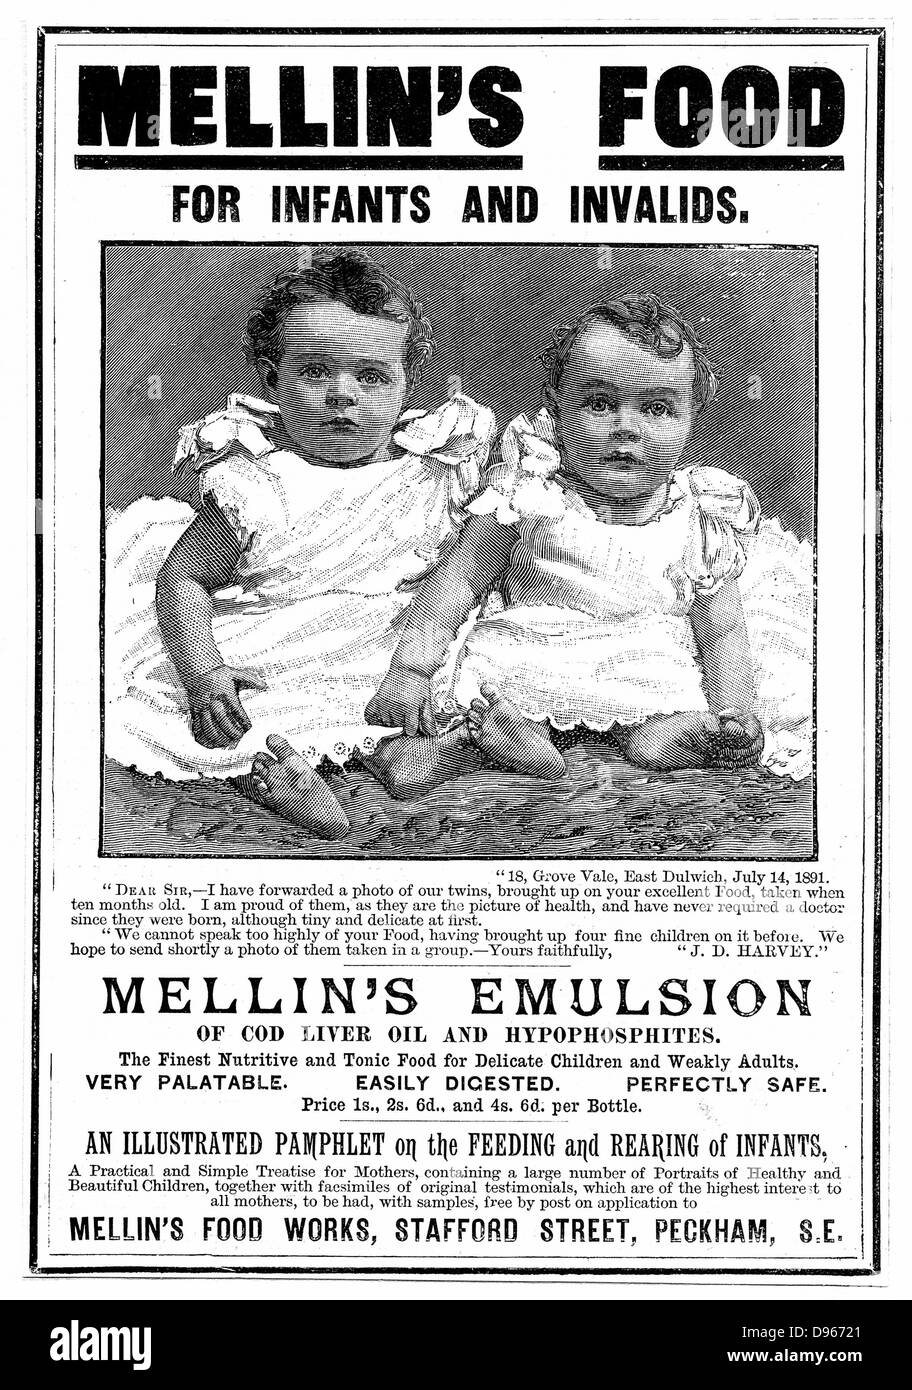 Advertisement for Mellin's Emulsion, food supplement based on cod liver oil, recommending it for children and invalids. Magazine advertisement  c1890. Engraving. Stock Photo